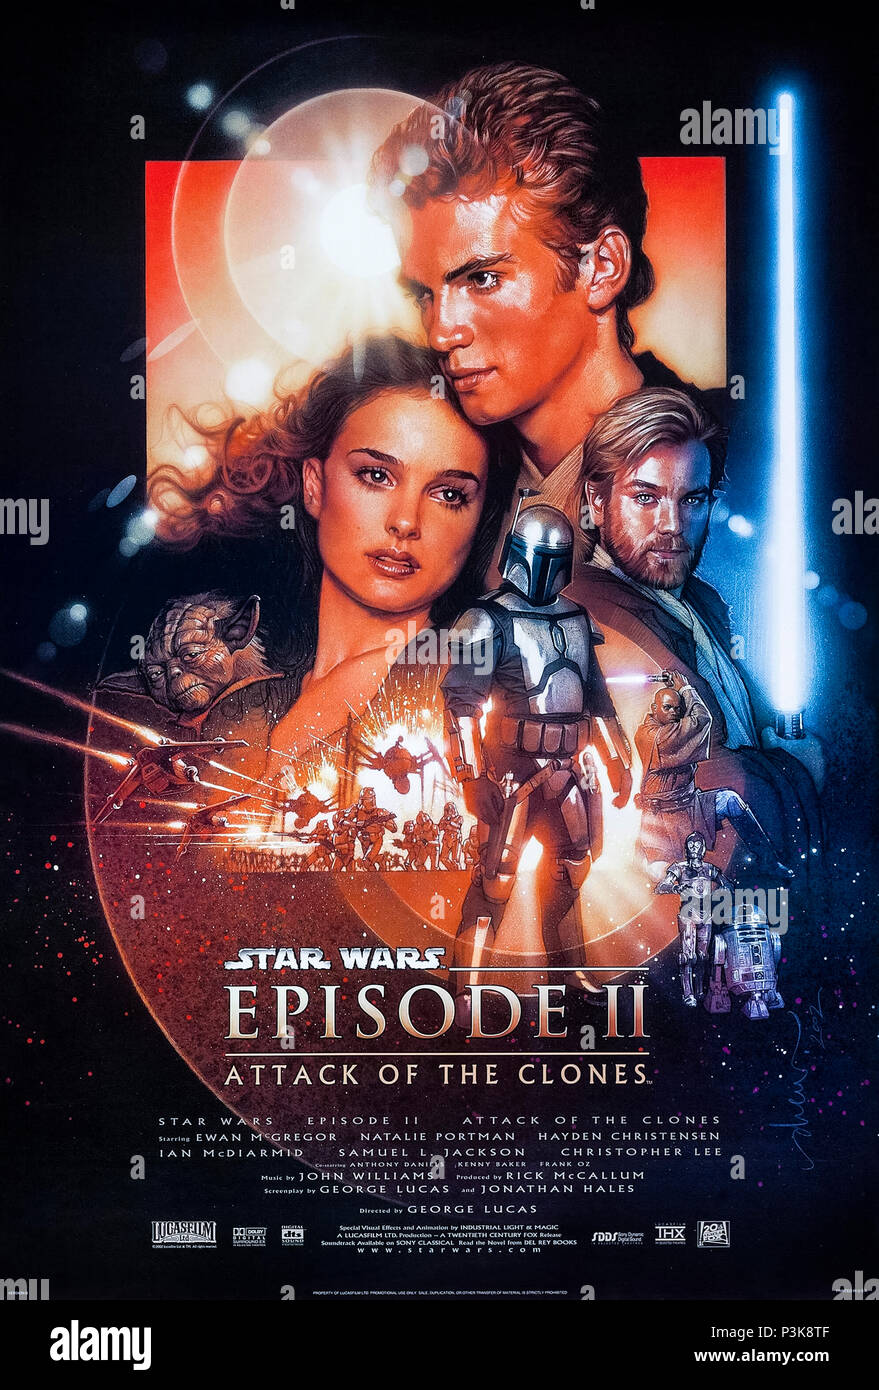 Star Wars: Episode II - Attack of the Clones (2002) directed by George Lucas and starring Hayden Christensen, Natalie Portman and Ewan McGregor. Anakin Skywalker and Padmé fall in love whilst the Jedi discover one of their number has ordered a secret clone army. Stock Photo